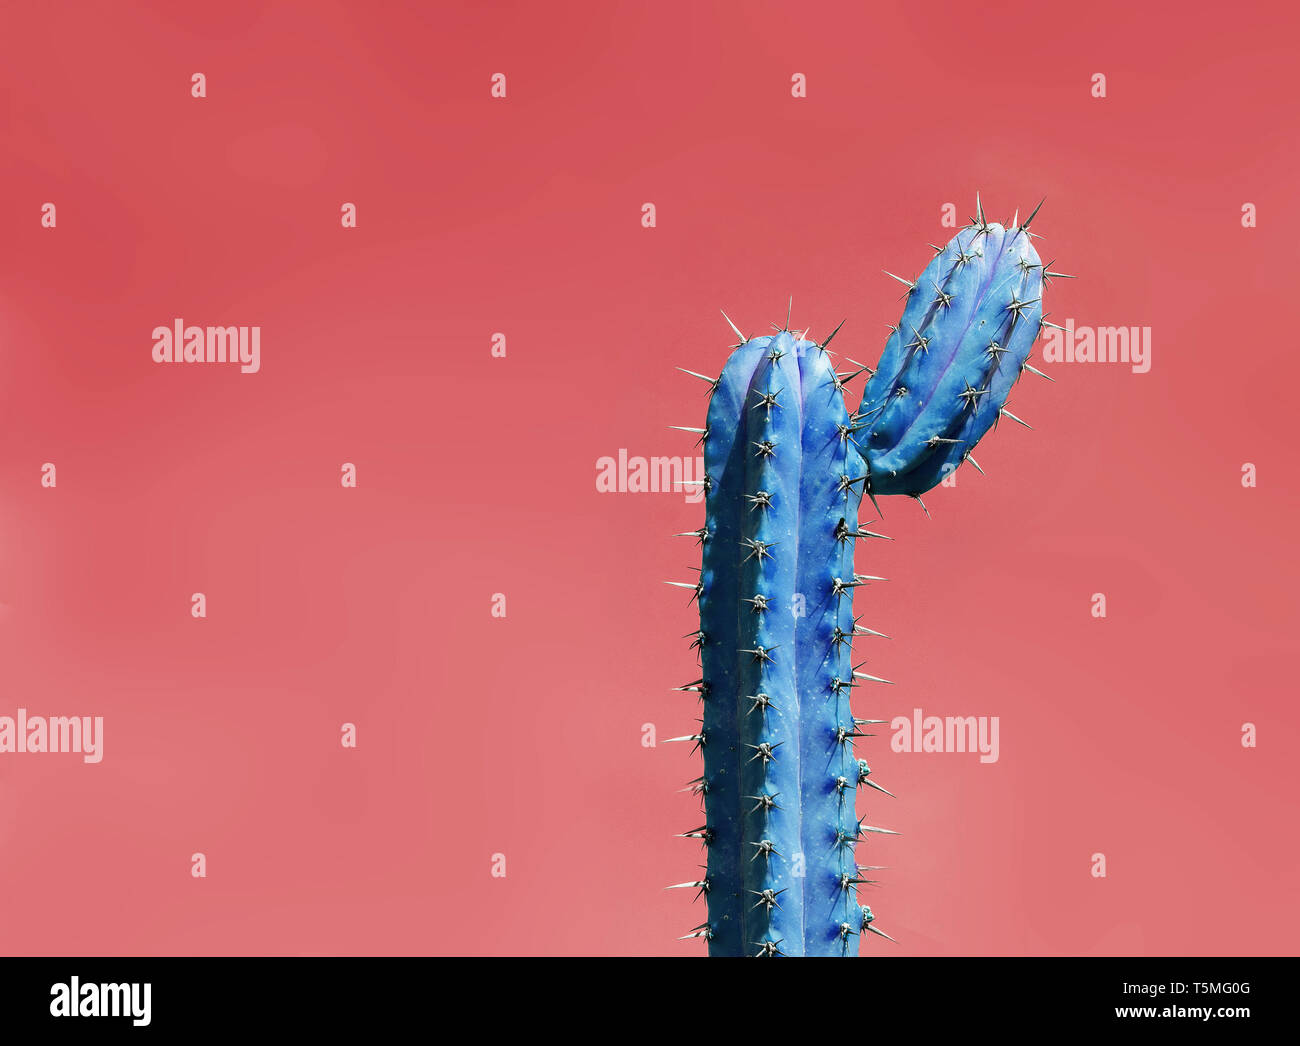 Surrealistic abstract blue thorny cactus with funny shape against red orange sky. Stock Photo